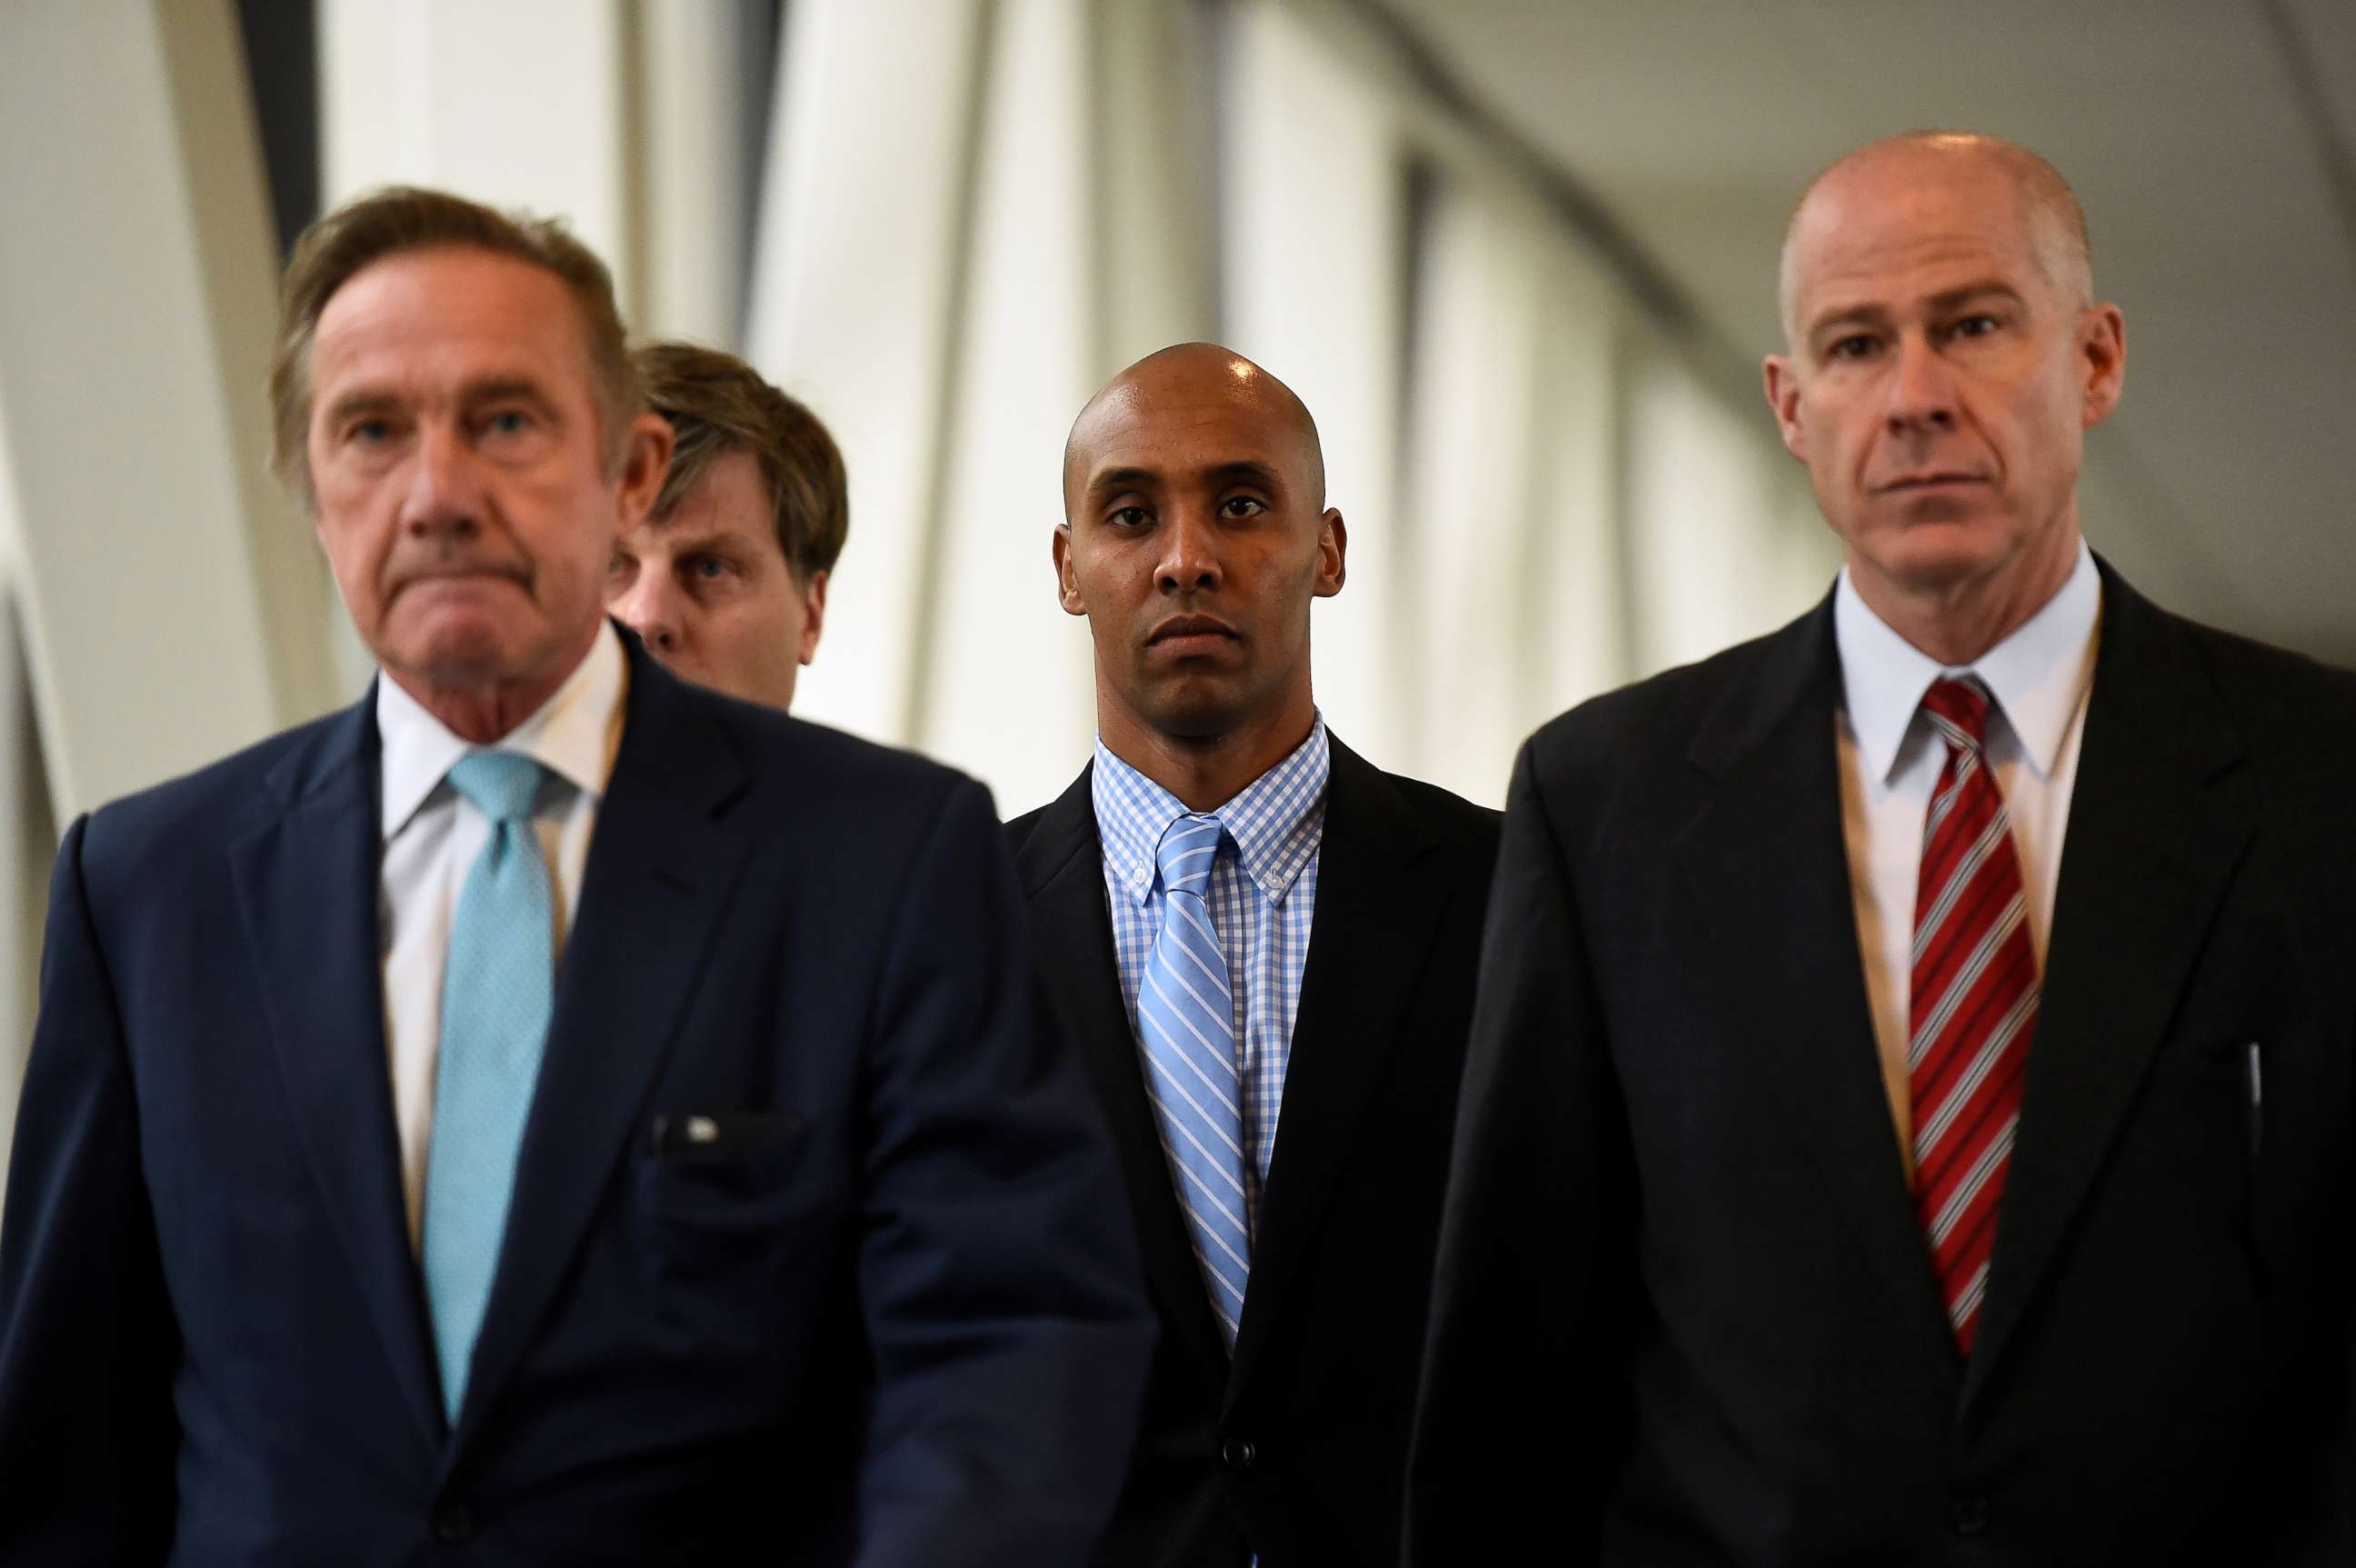 PHOTO: Mohamed Noor, center, former Minnesota policeman on trial for fatally shooting an Australian woman, walks into the courthouse in Minneapolis, Minn., April 30, 2019.